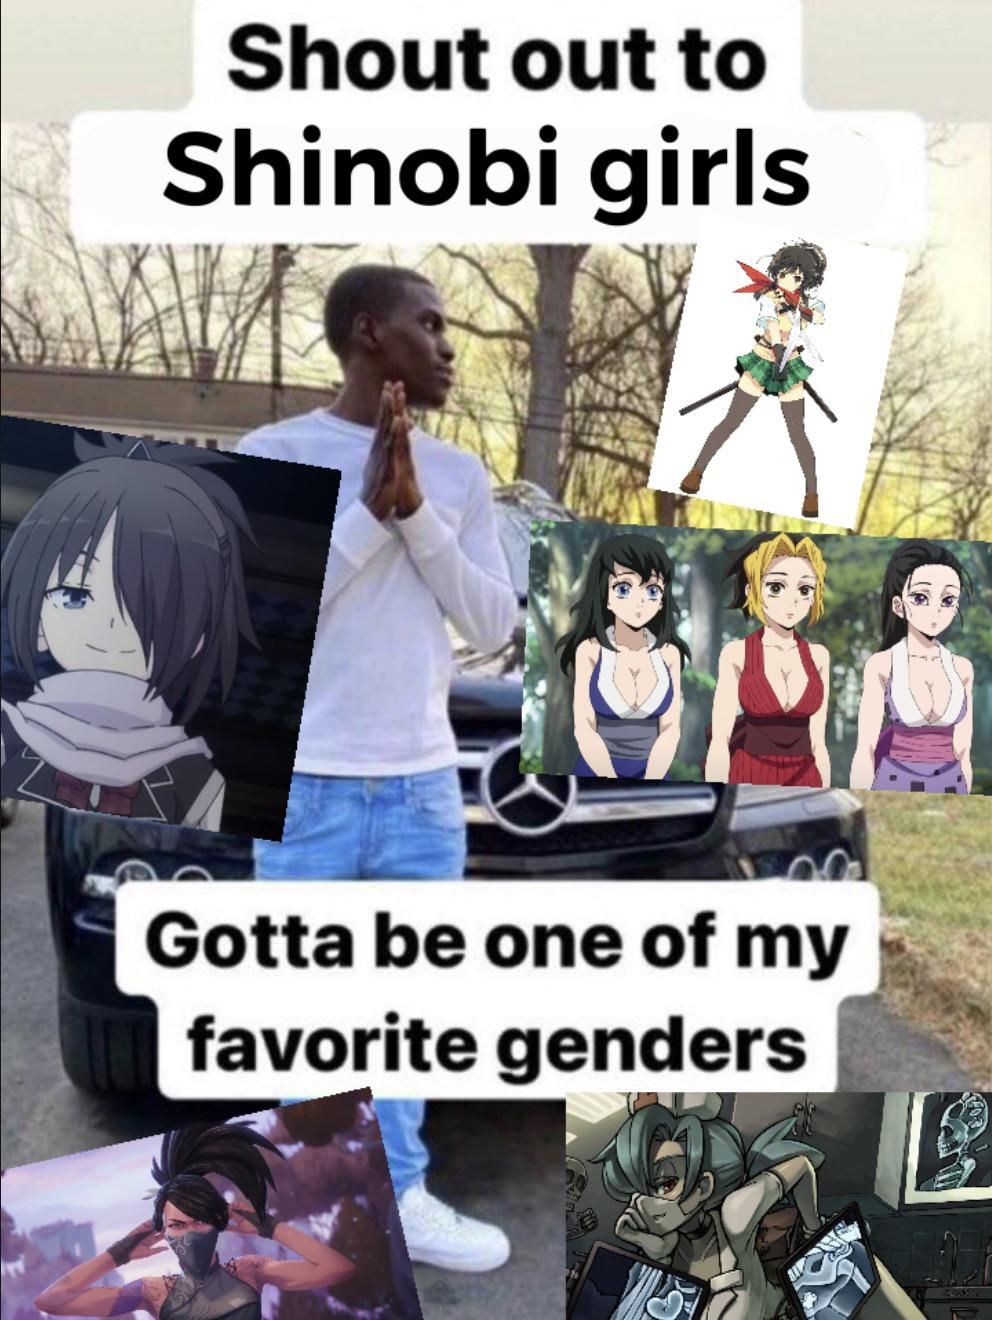 It’s isn’t a coincidence that Shinobi girls are top tier